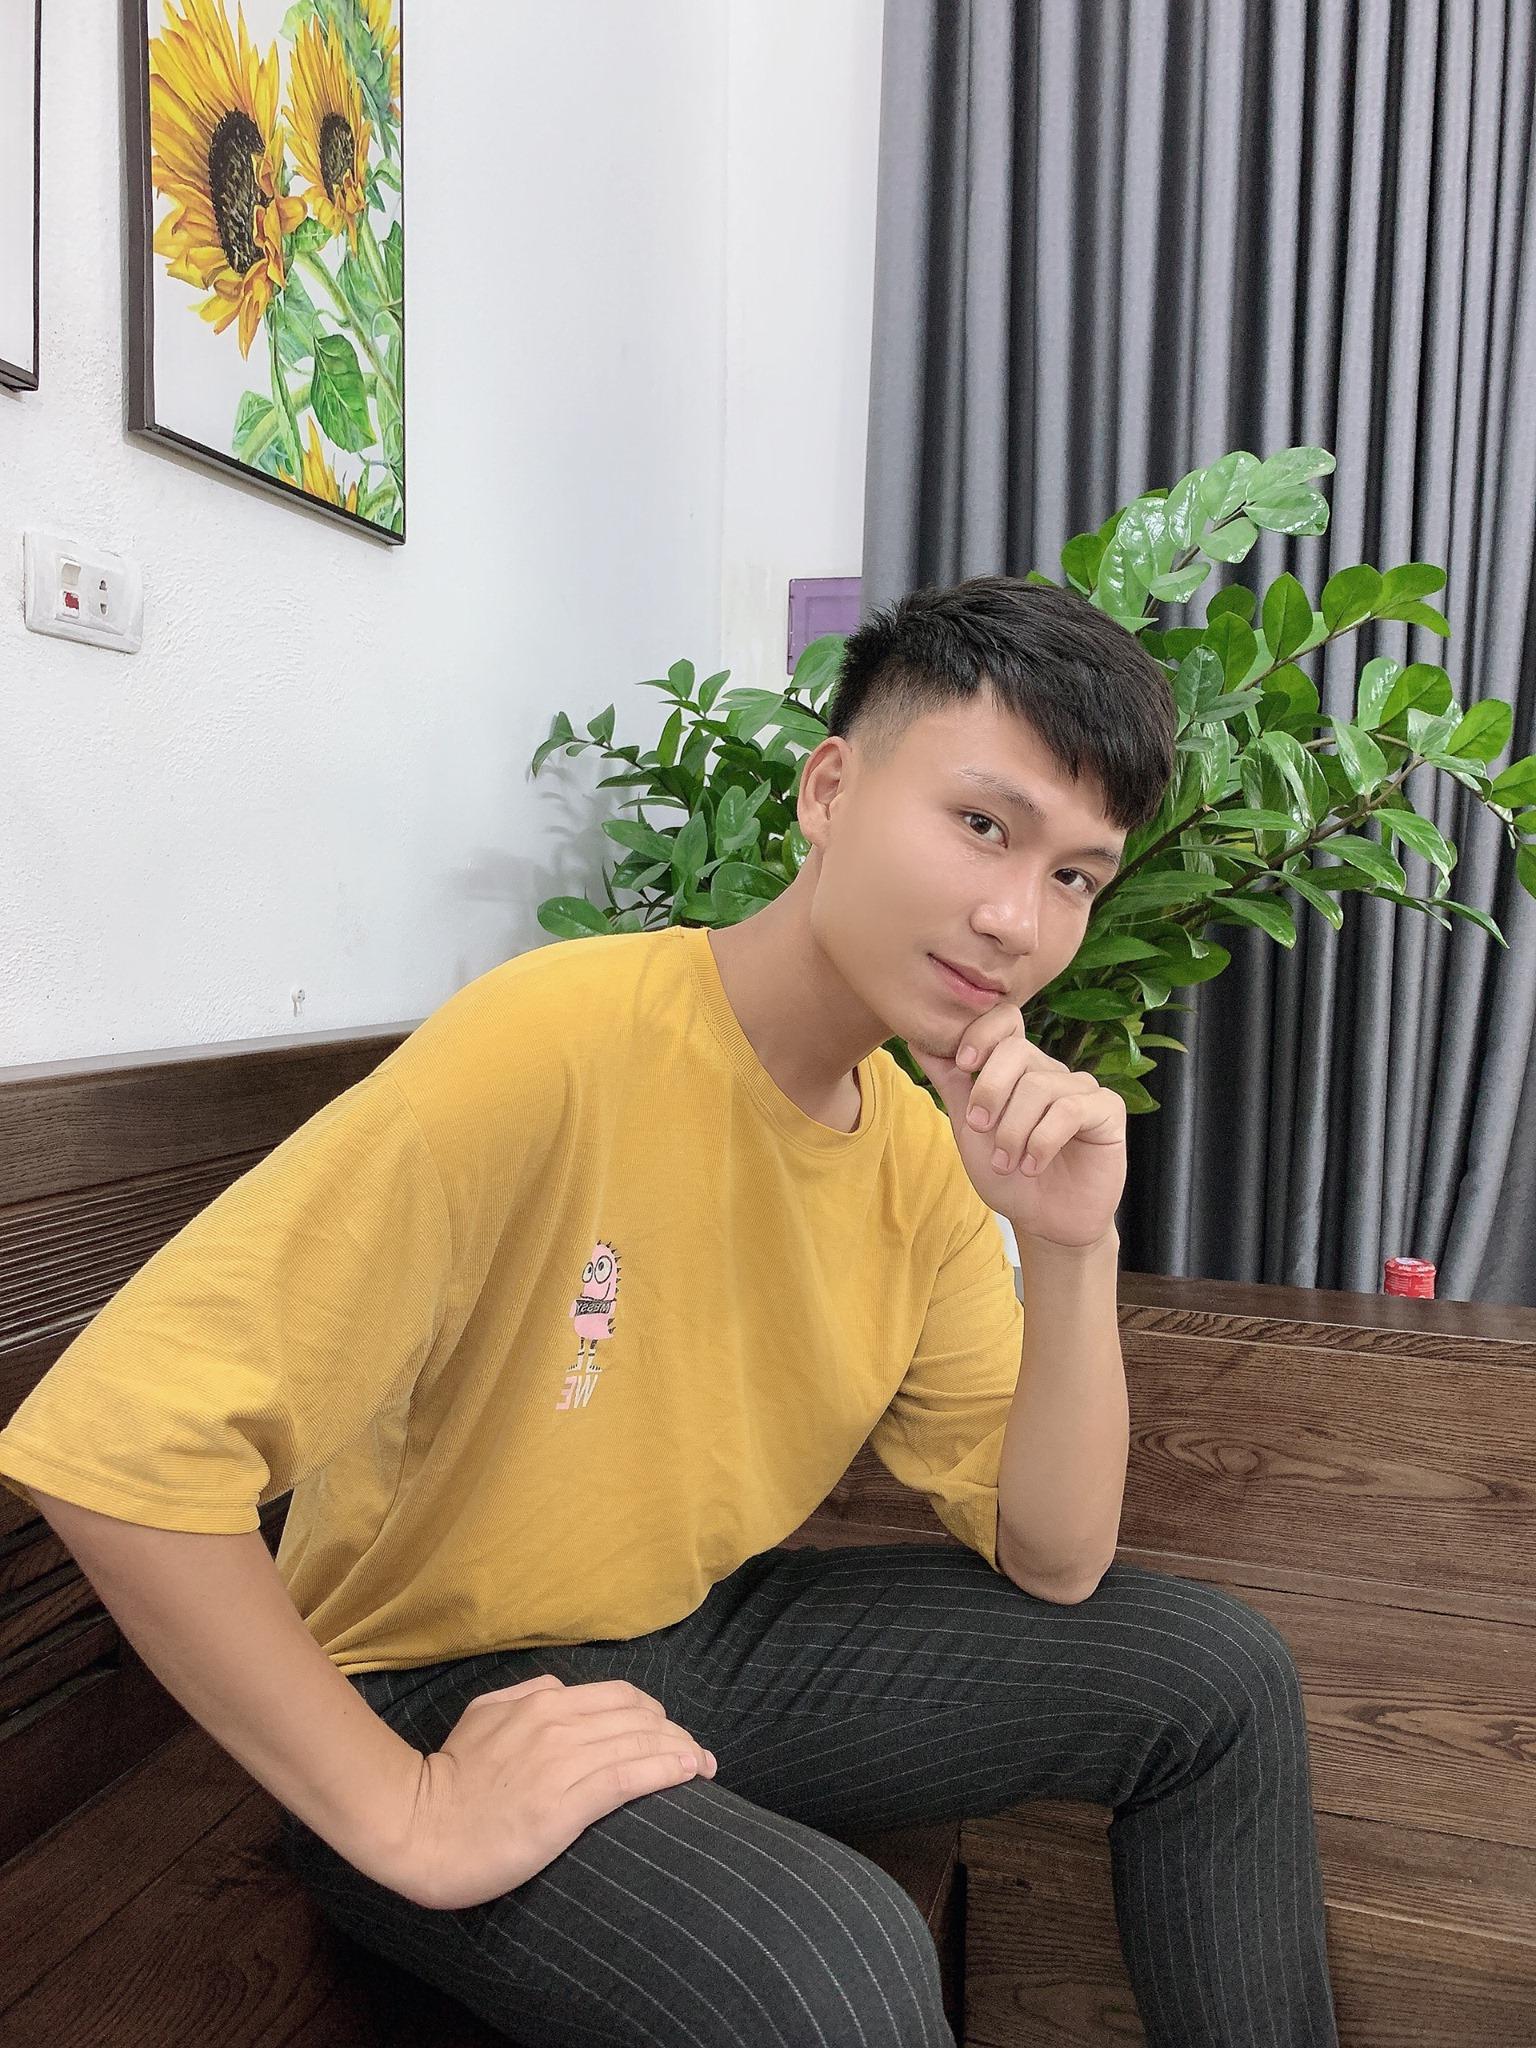  Hoang Minh Hieu handsome personality